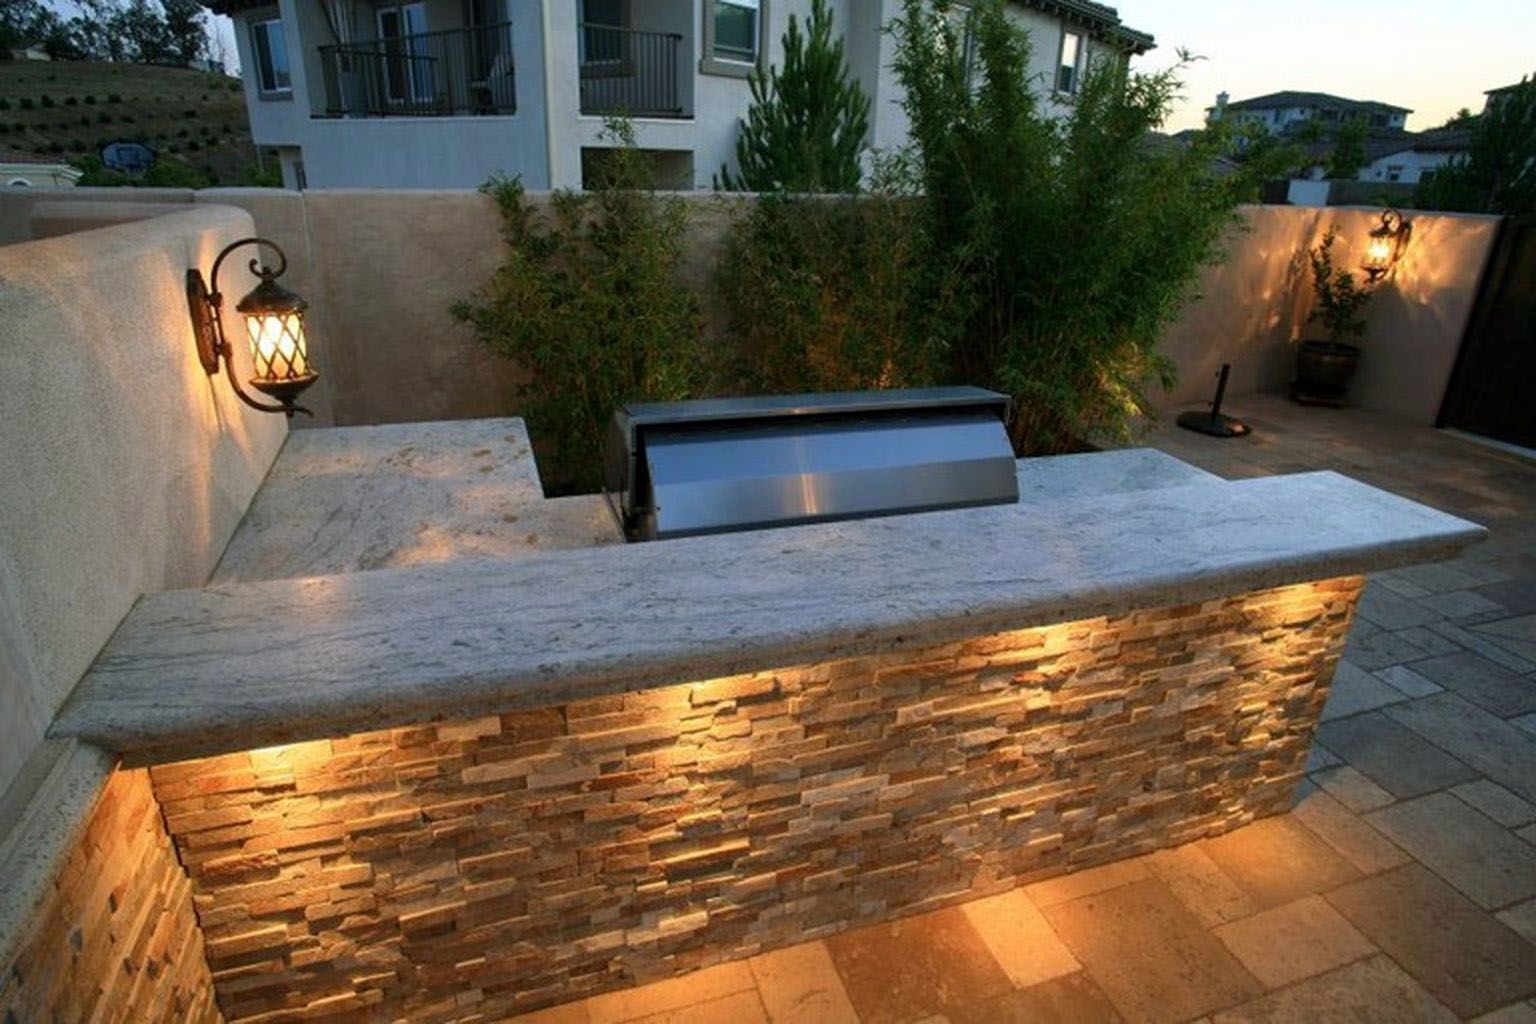 Treat Yourself And Get Built-In Outdoor Kitchen You Always Wanted